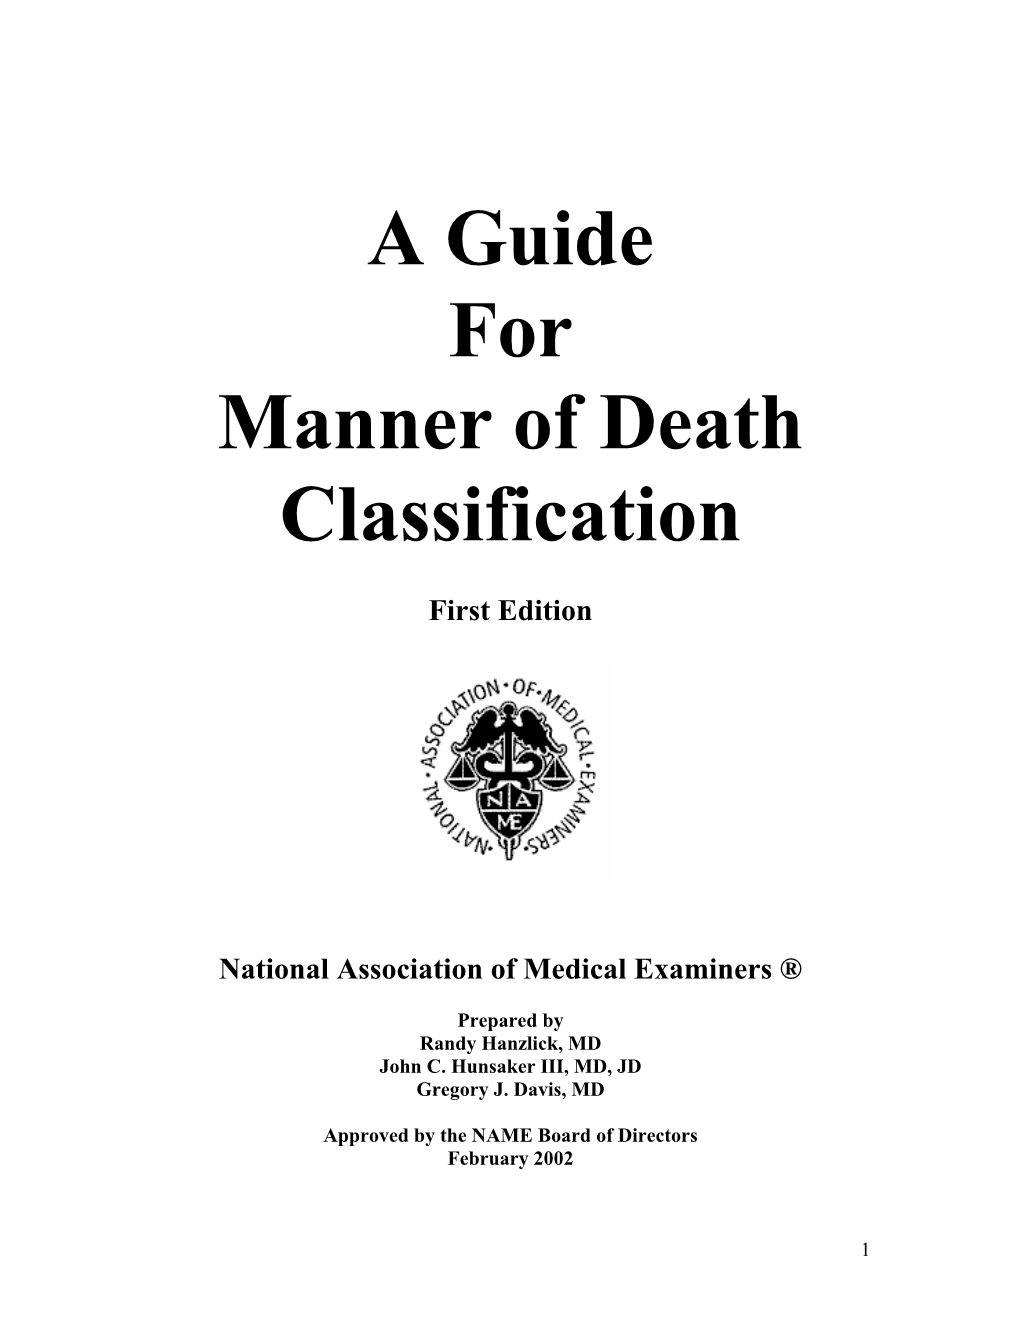 Manner of Death Guide